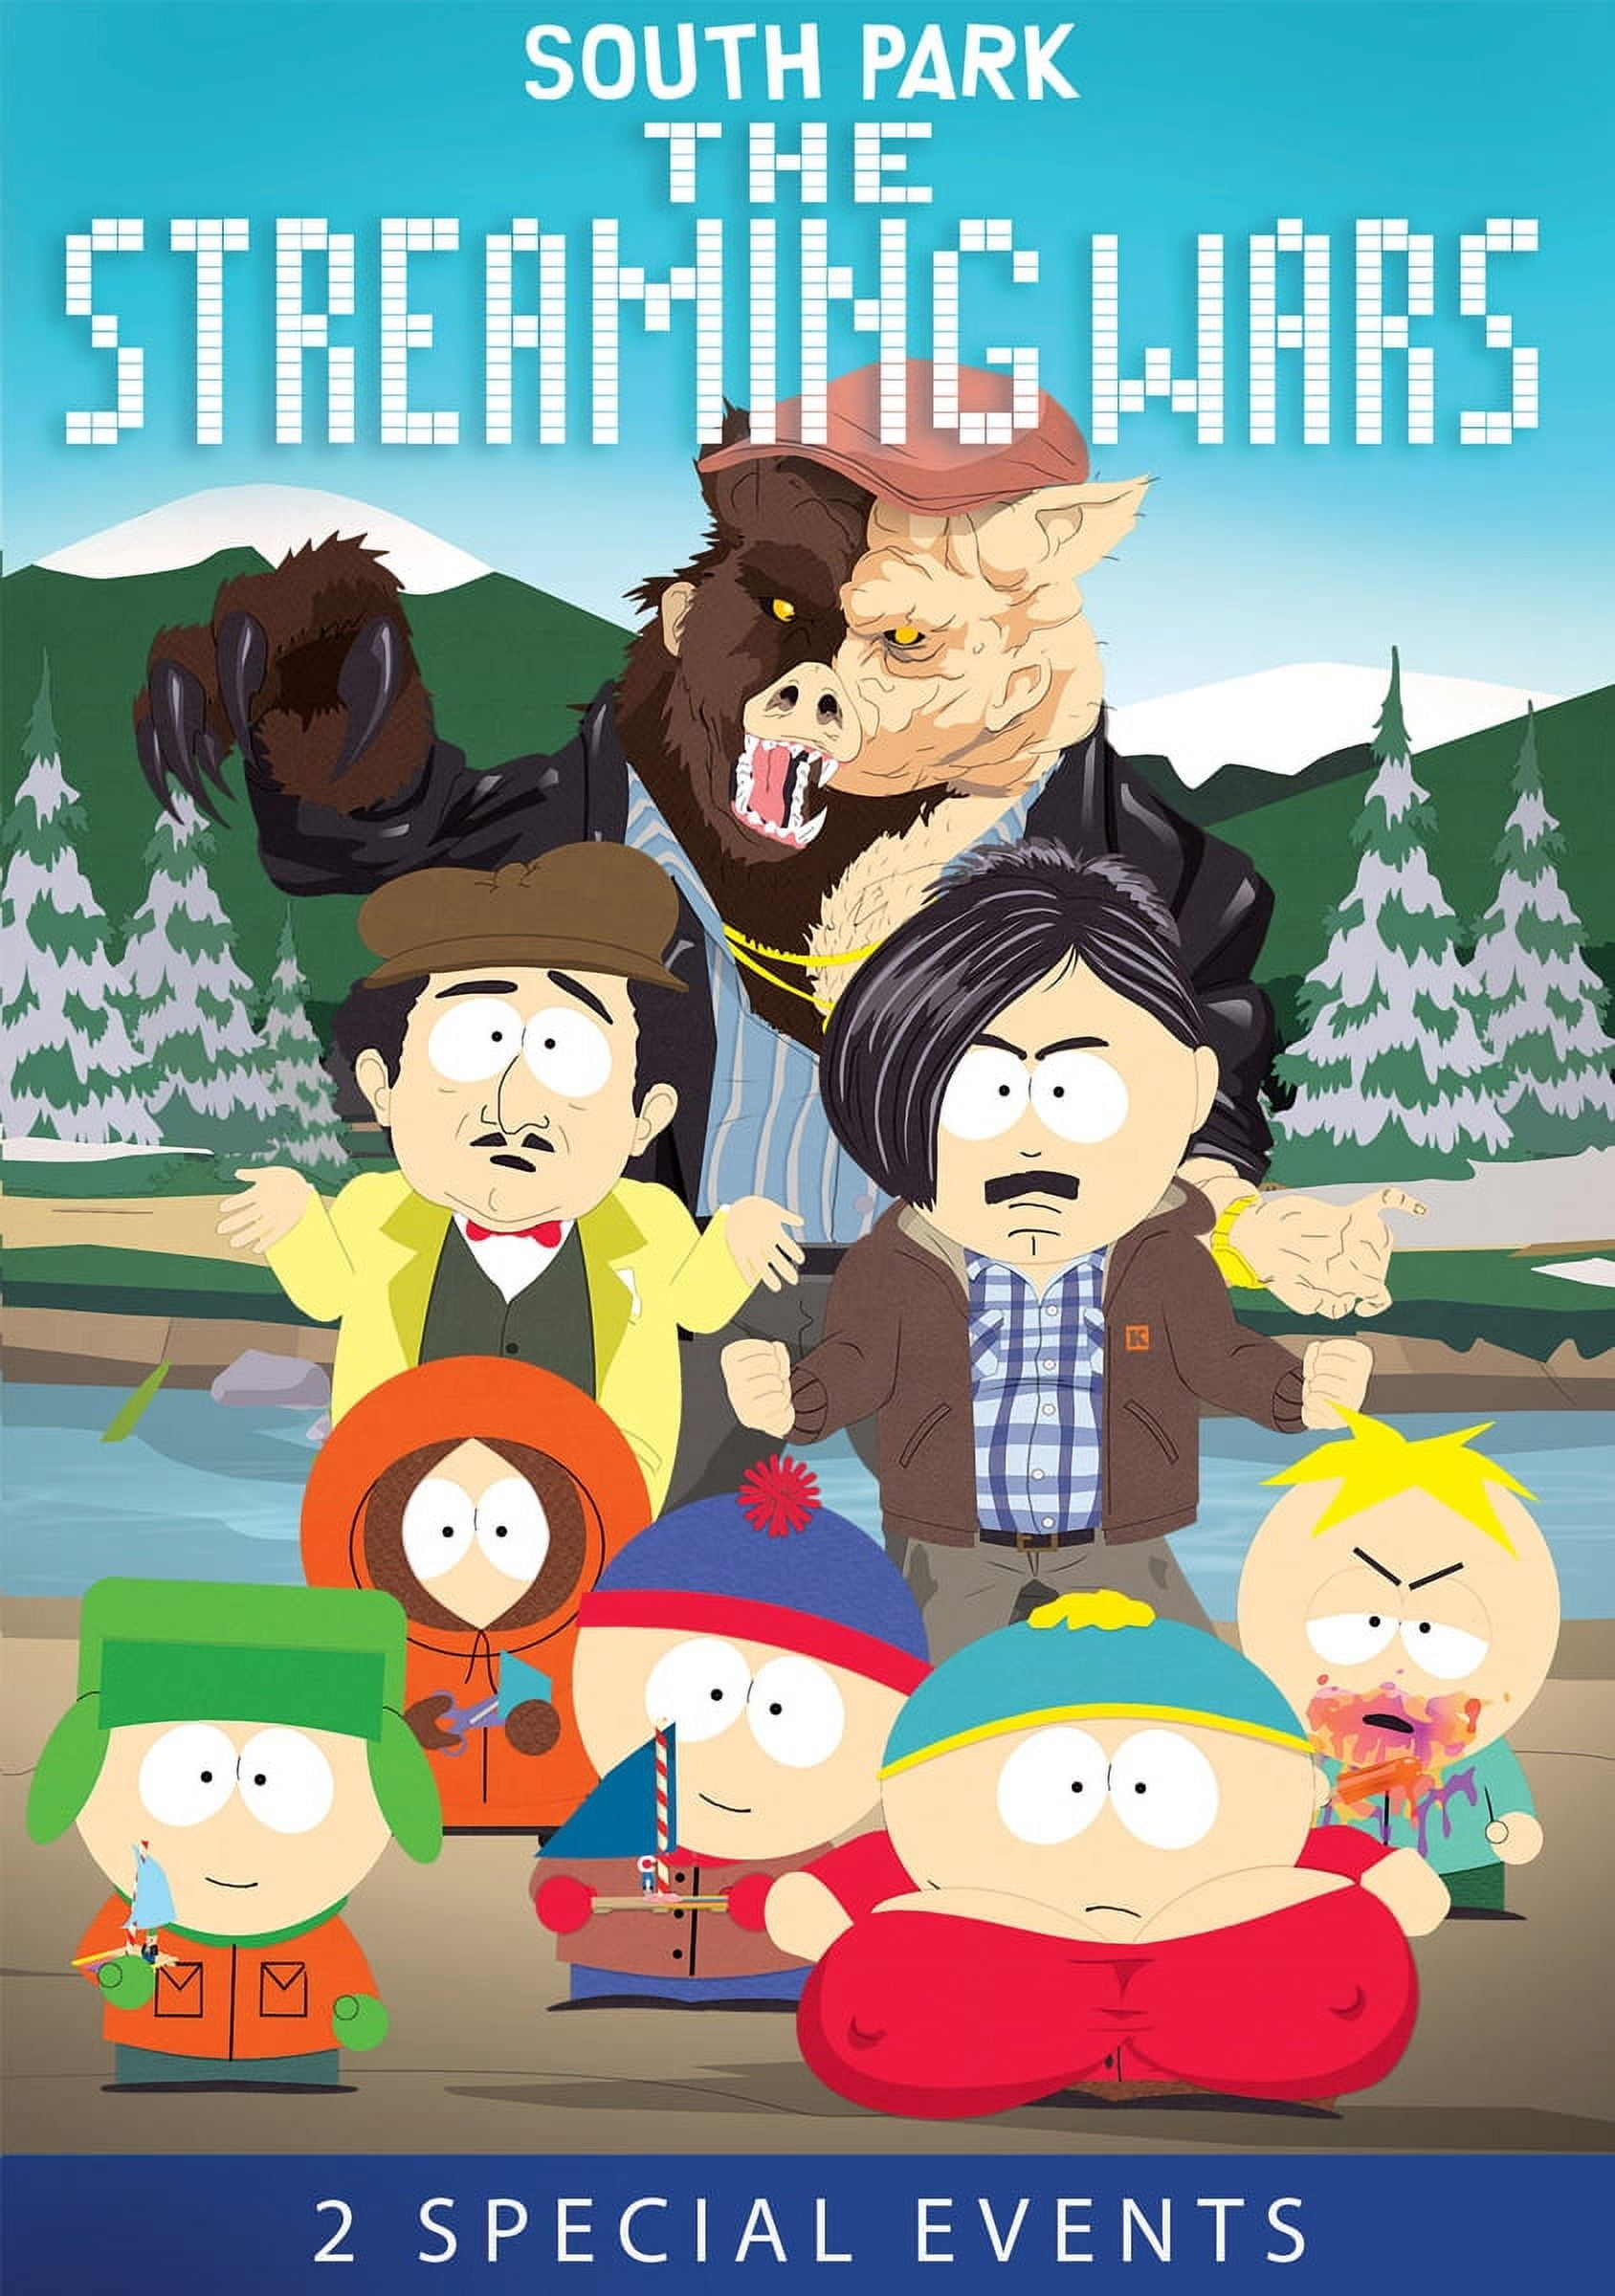 South Park: The Streaming Wars Blu-ray